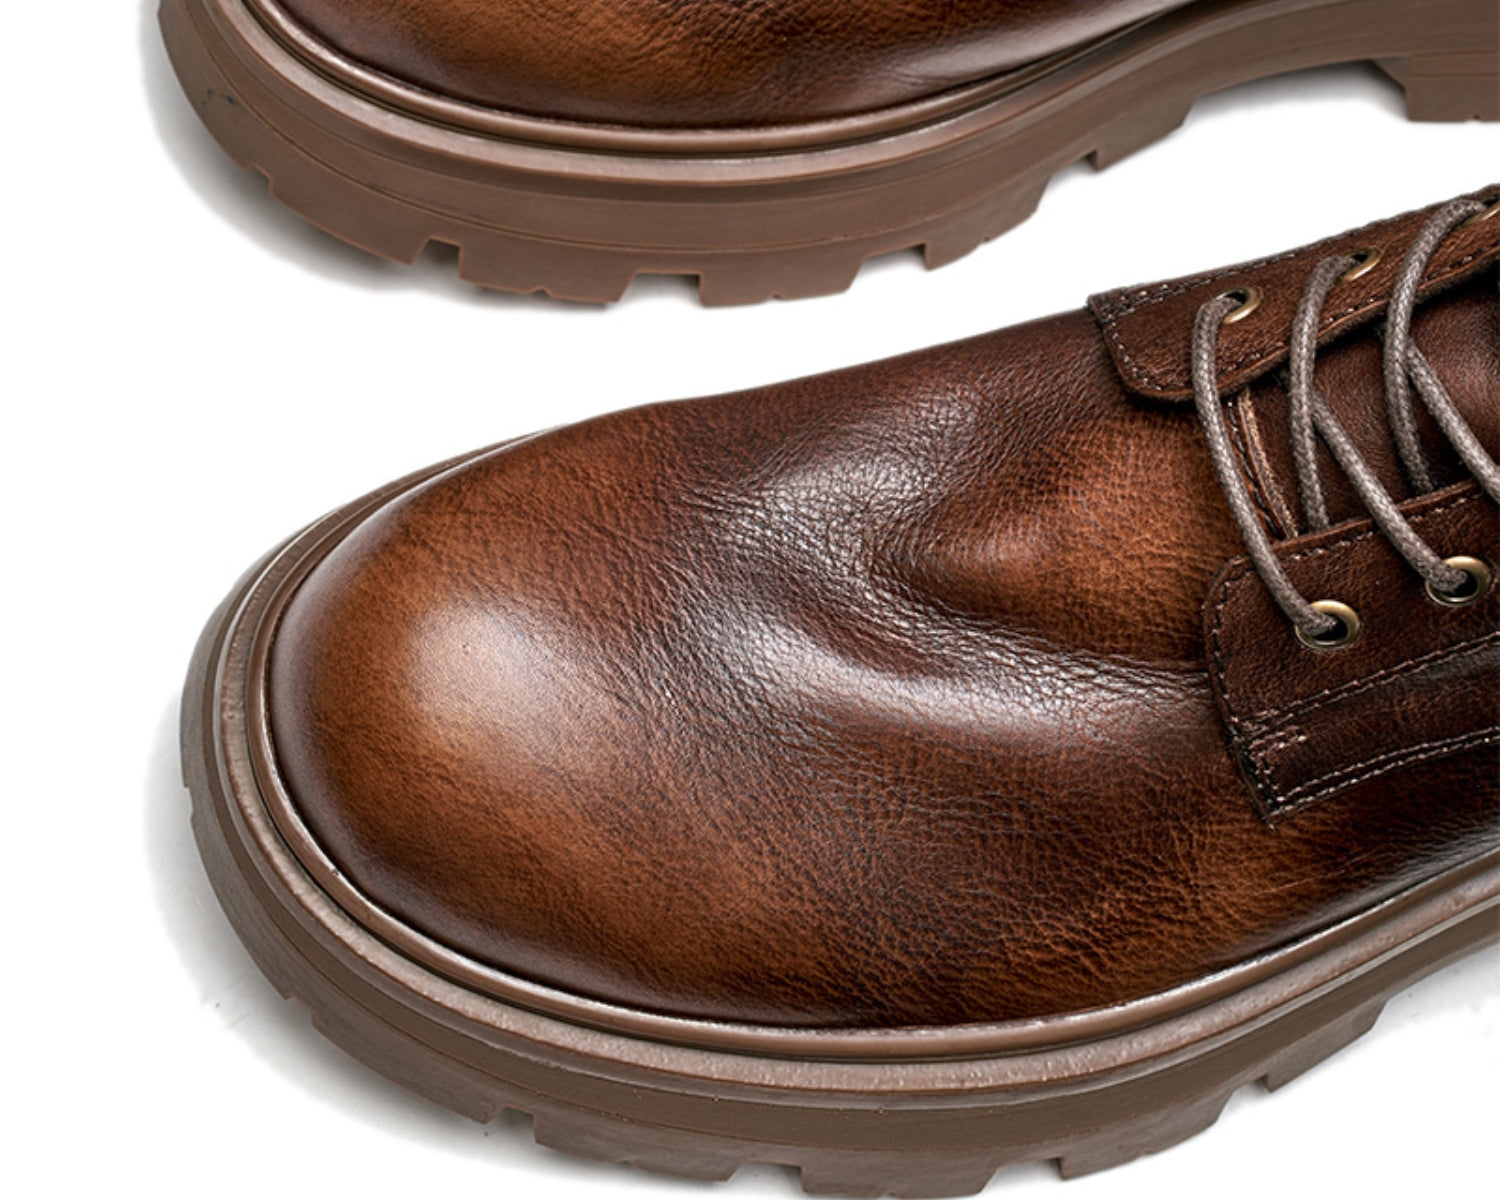 Men's weatherproof leather lace-up work boots with lug sole3